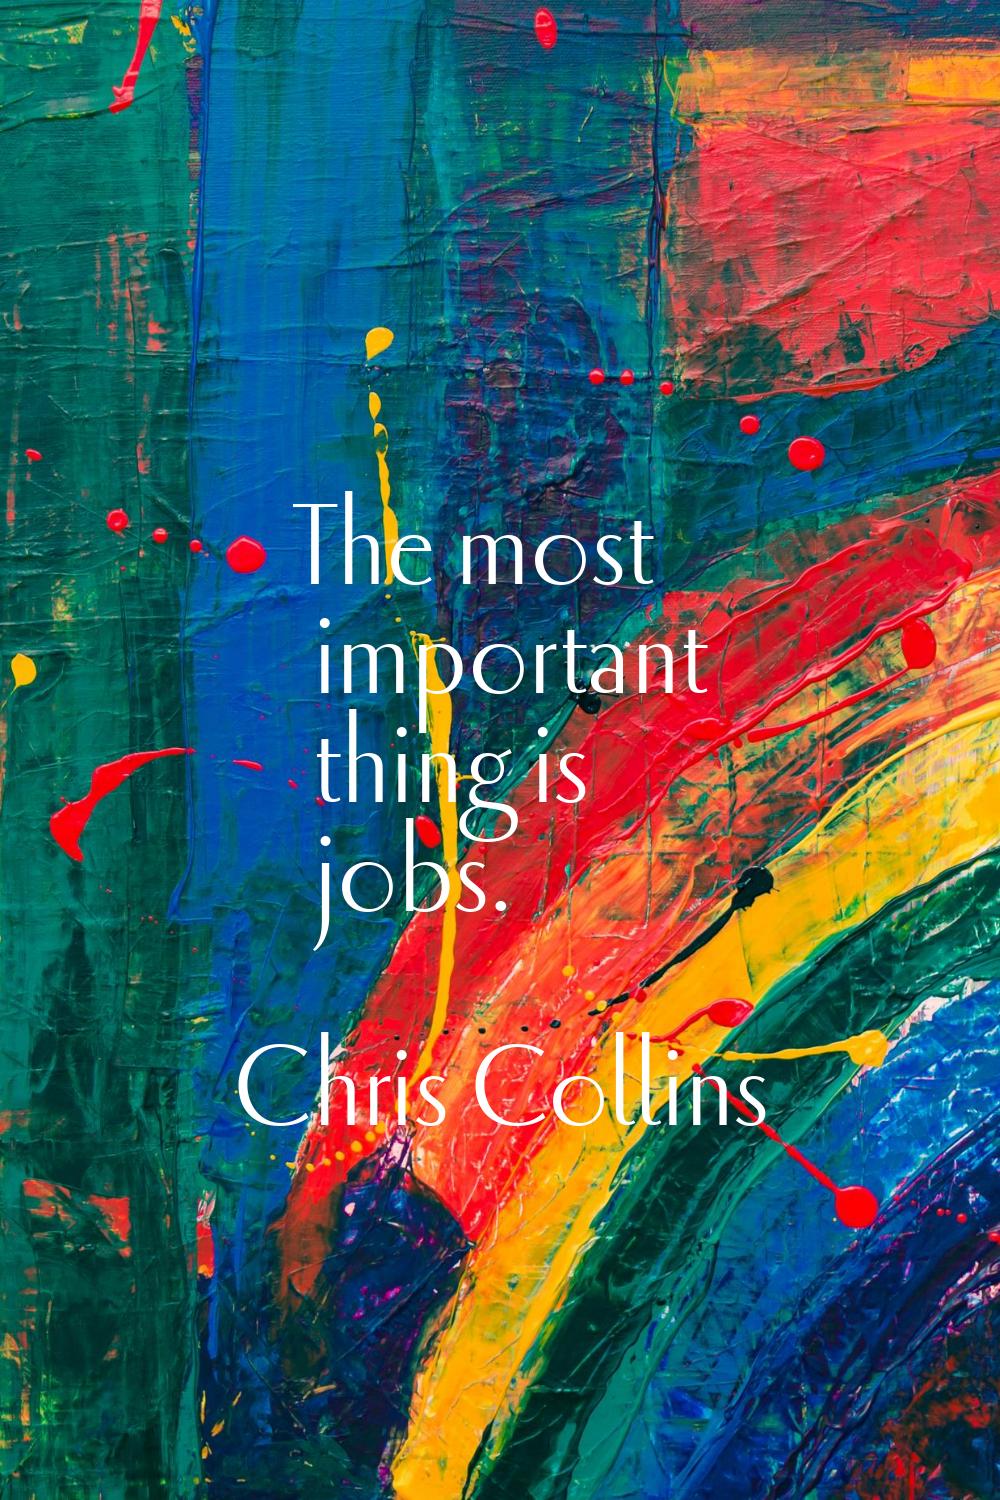 The most important thing is jobs.